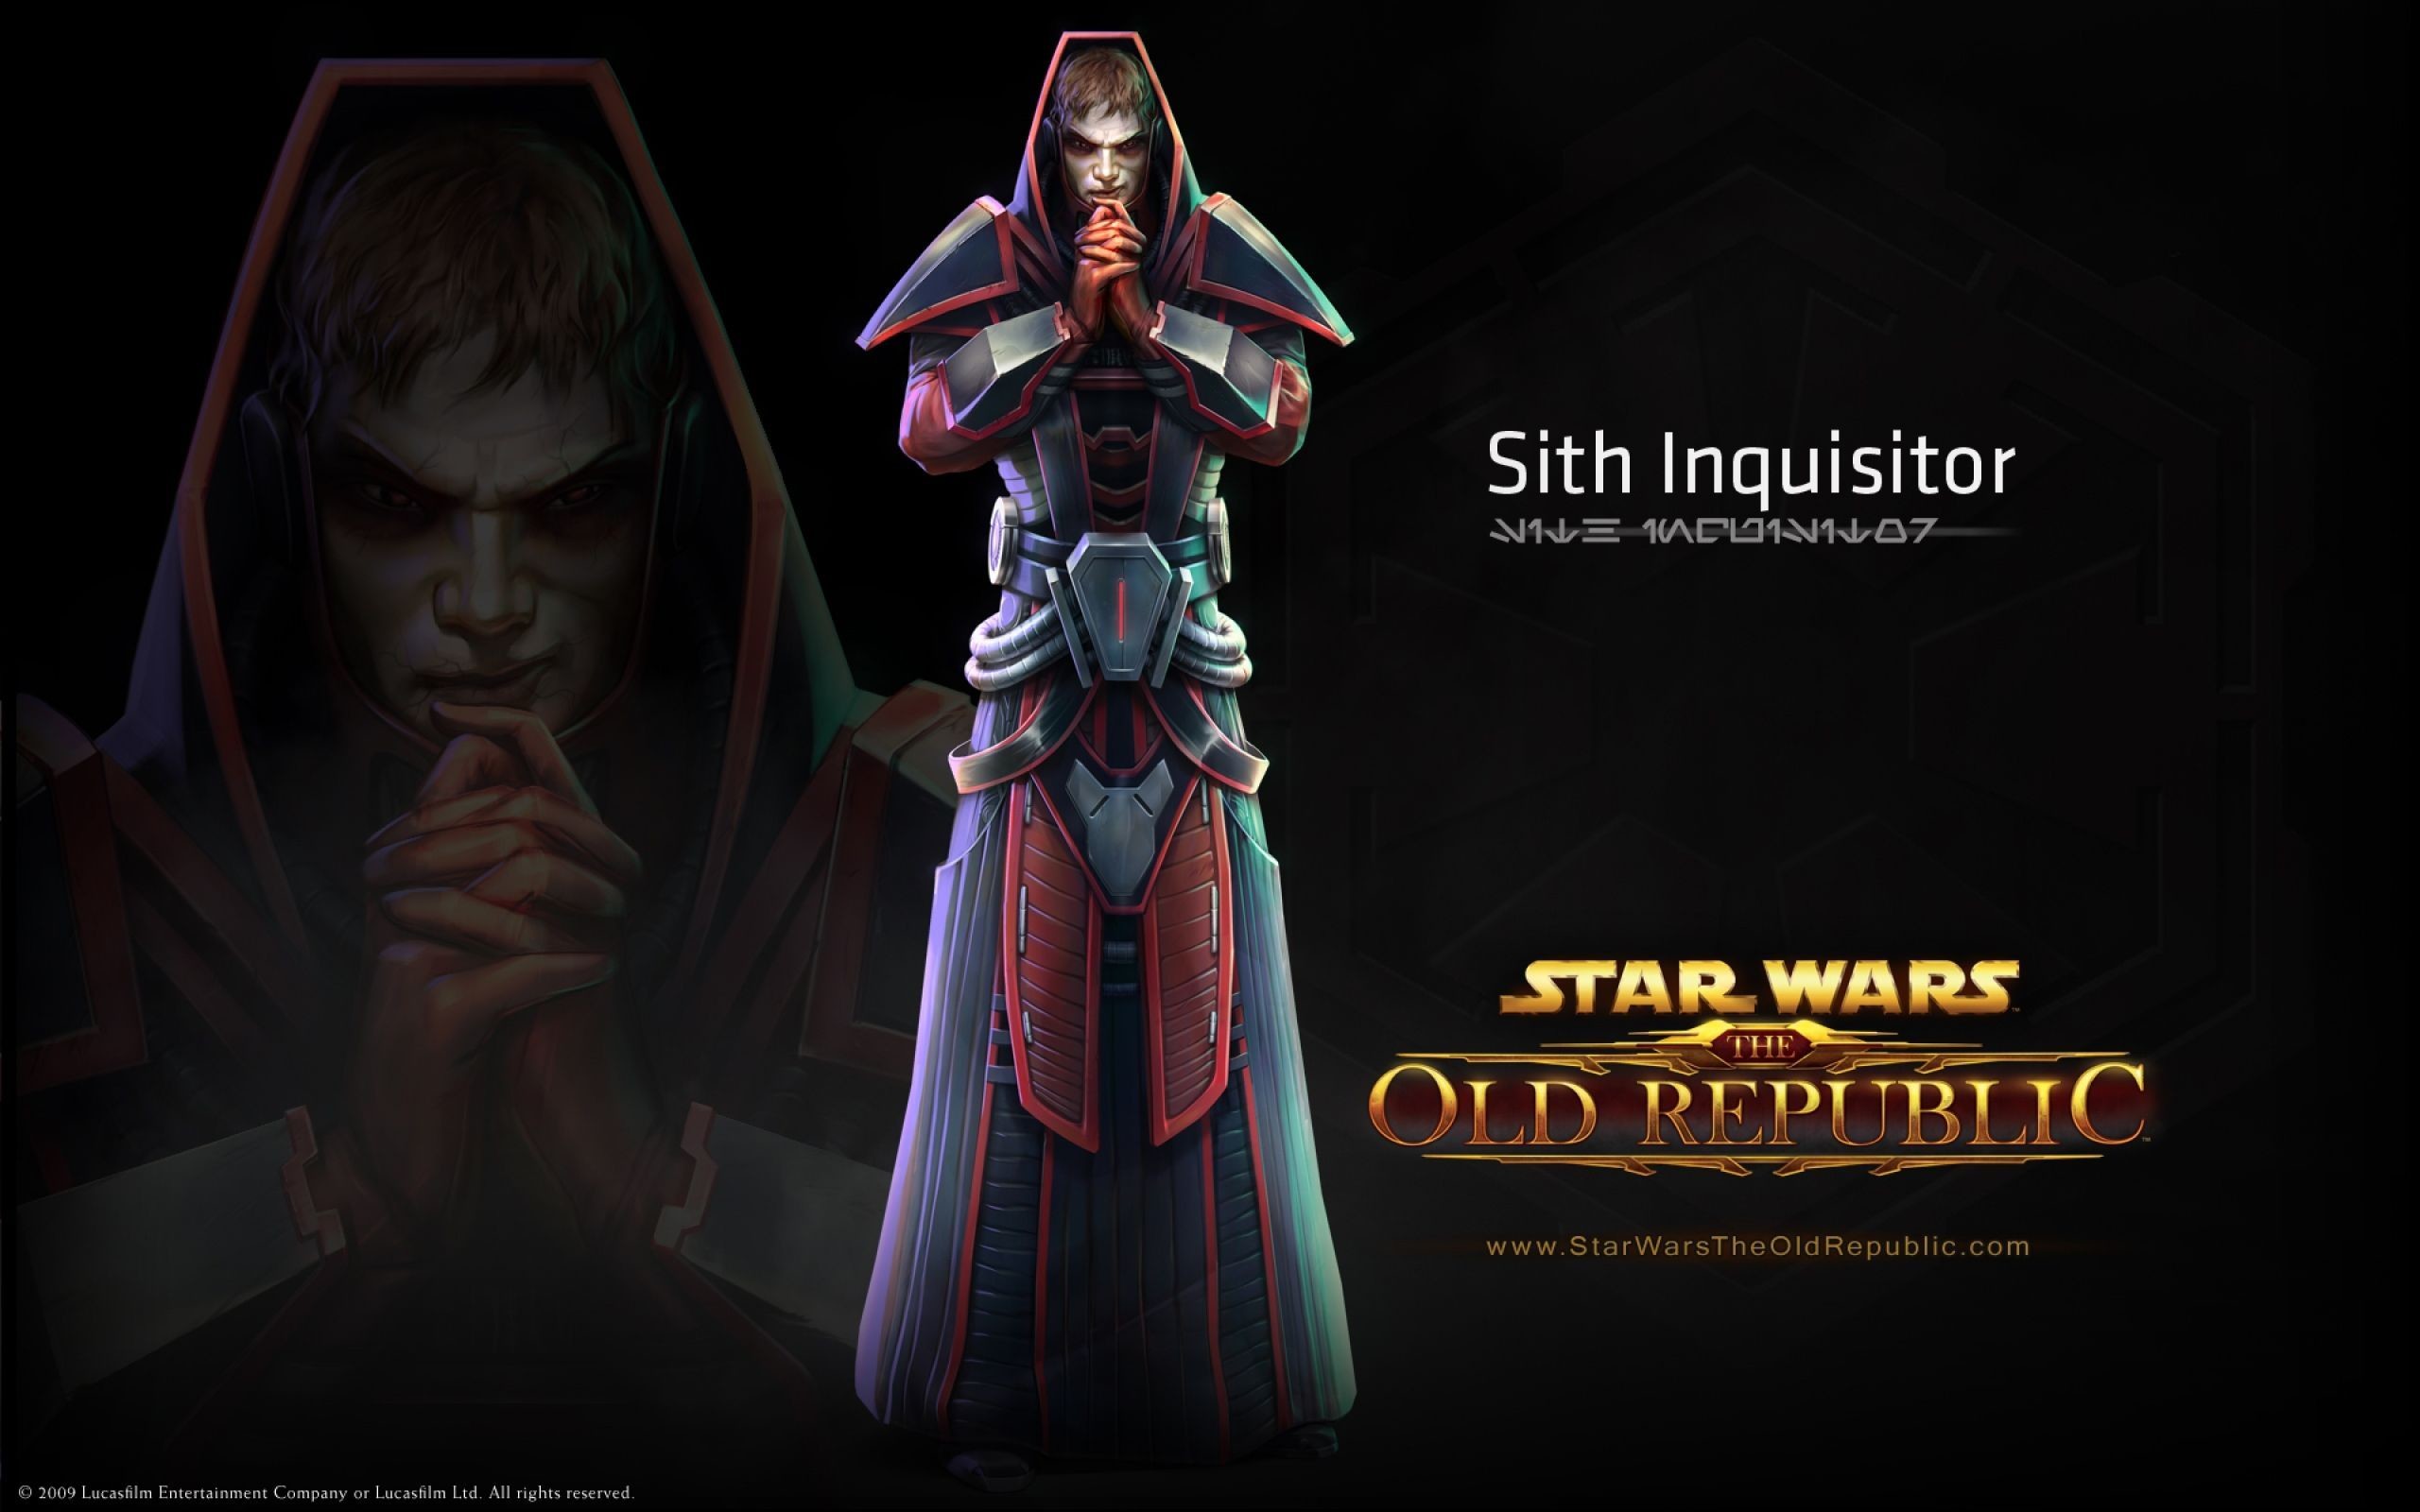 2560x1600 Sith Inquisitor: Swtor Computer Wallpapers, Desktop Backgrounds .